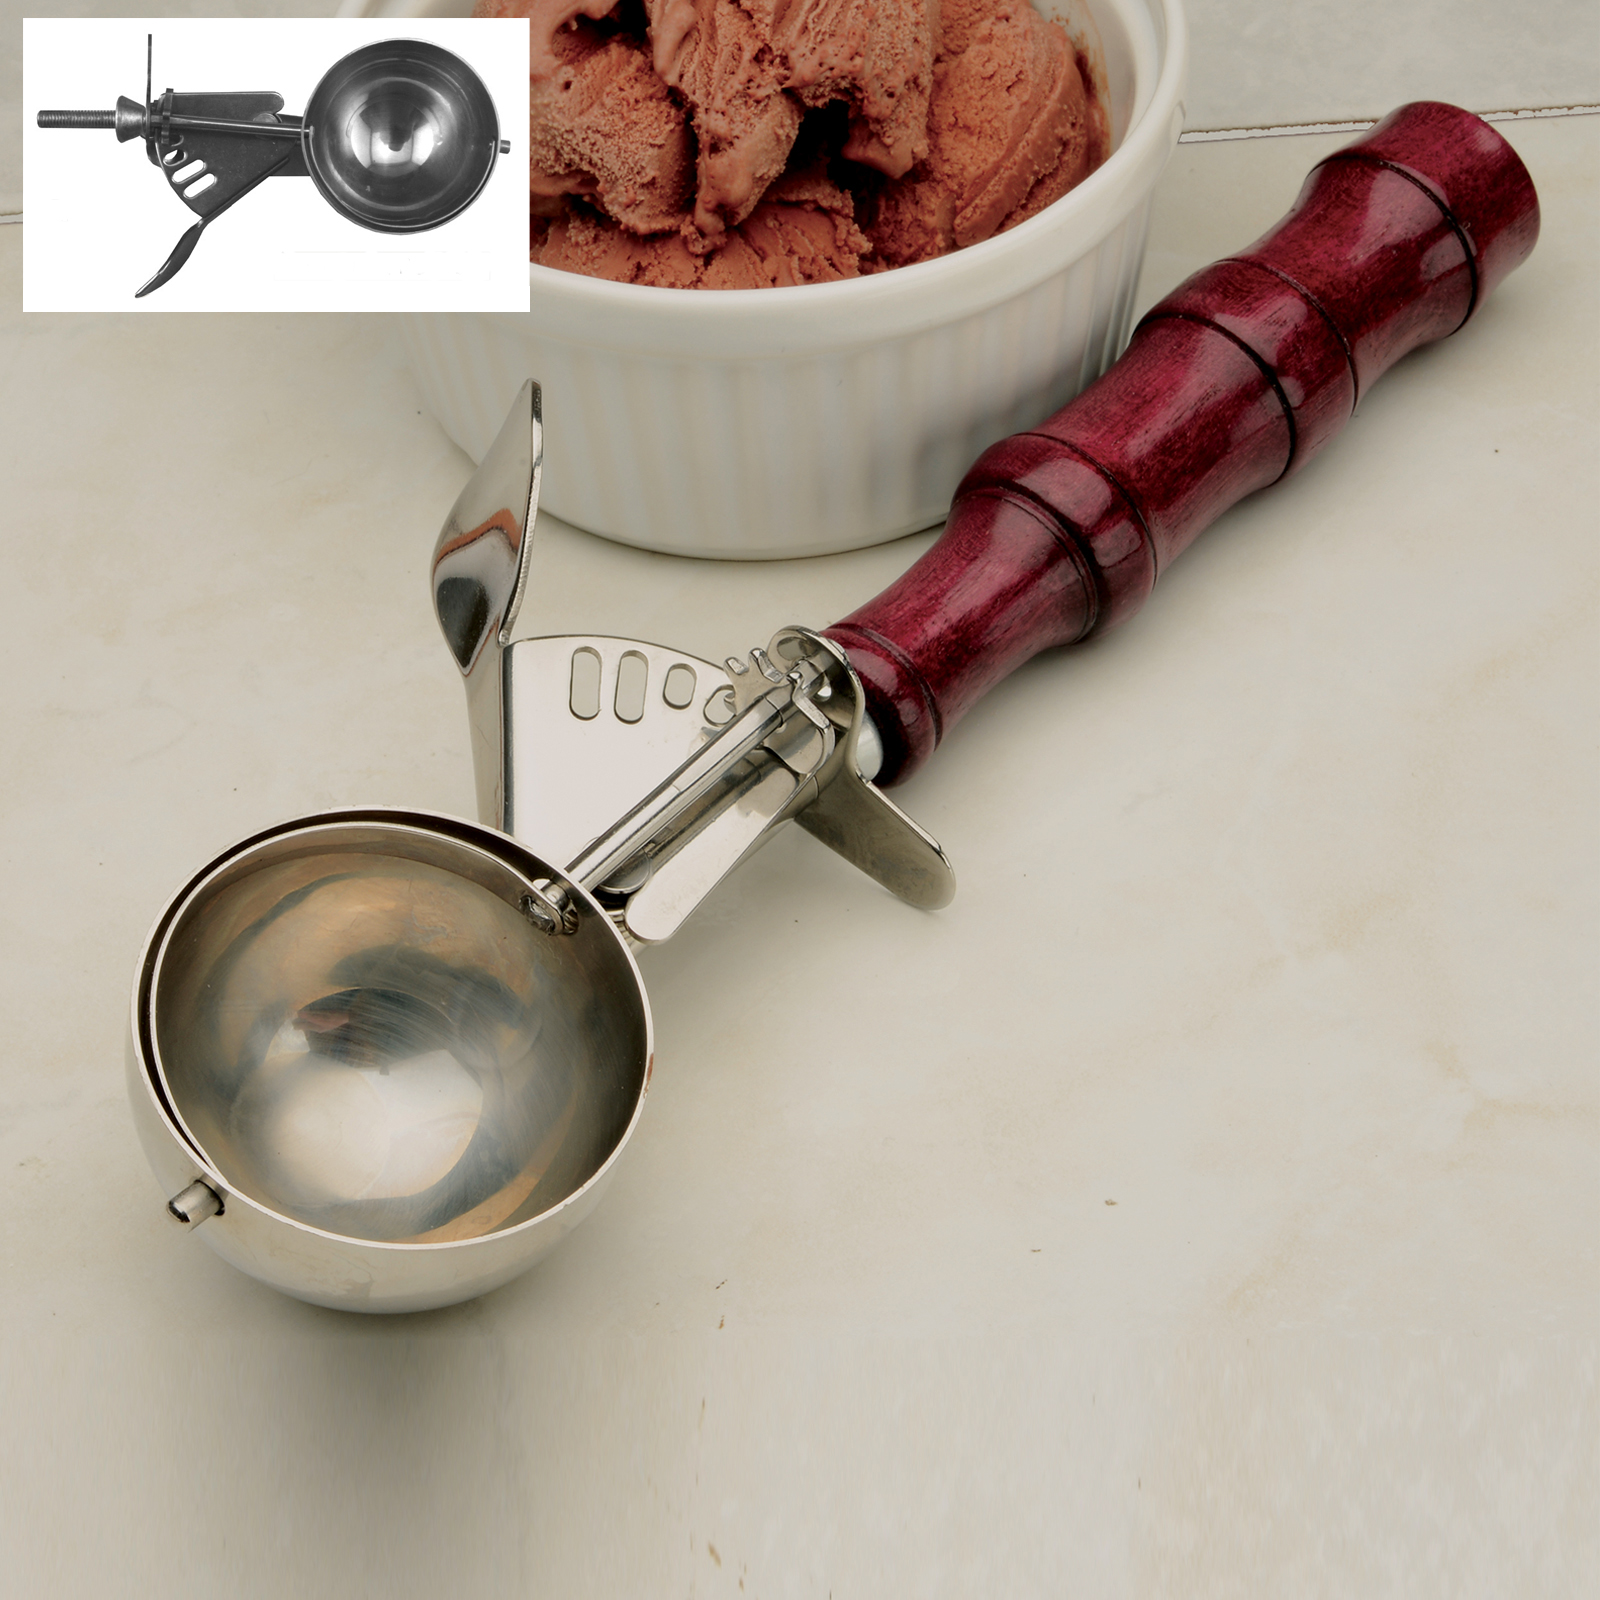 Professional ice-cream Scoop without a mechanism, It is made of